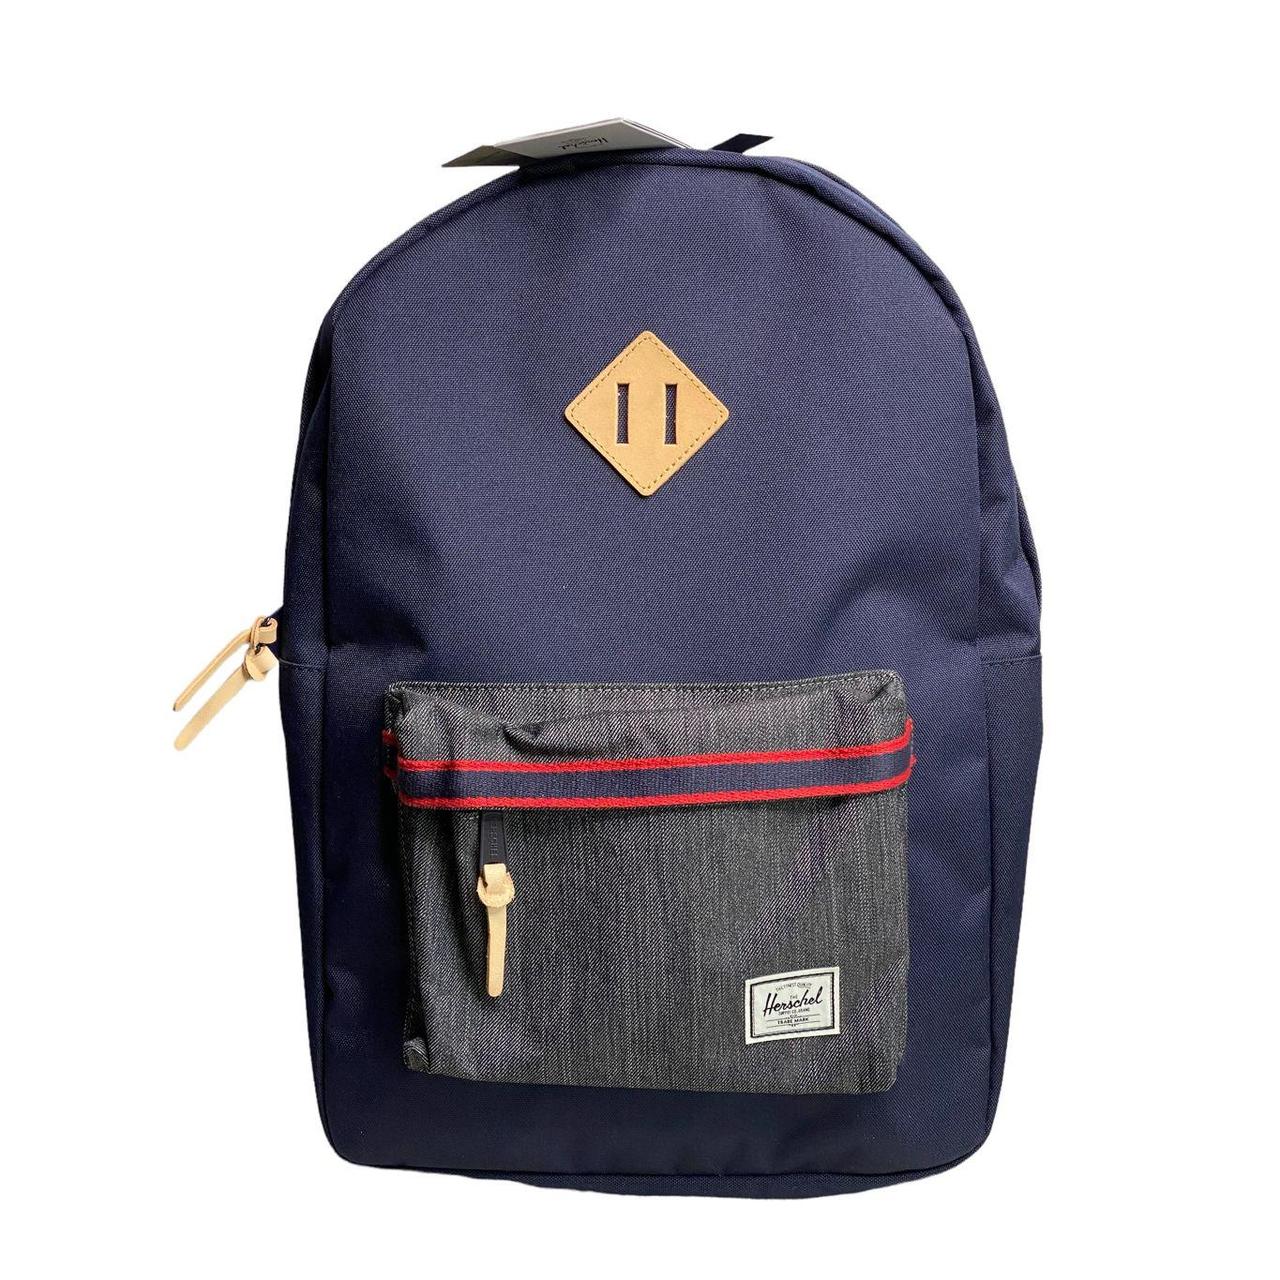 Herschel Supply Company, Bags, Laptop Case See Pics For Dimensions